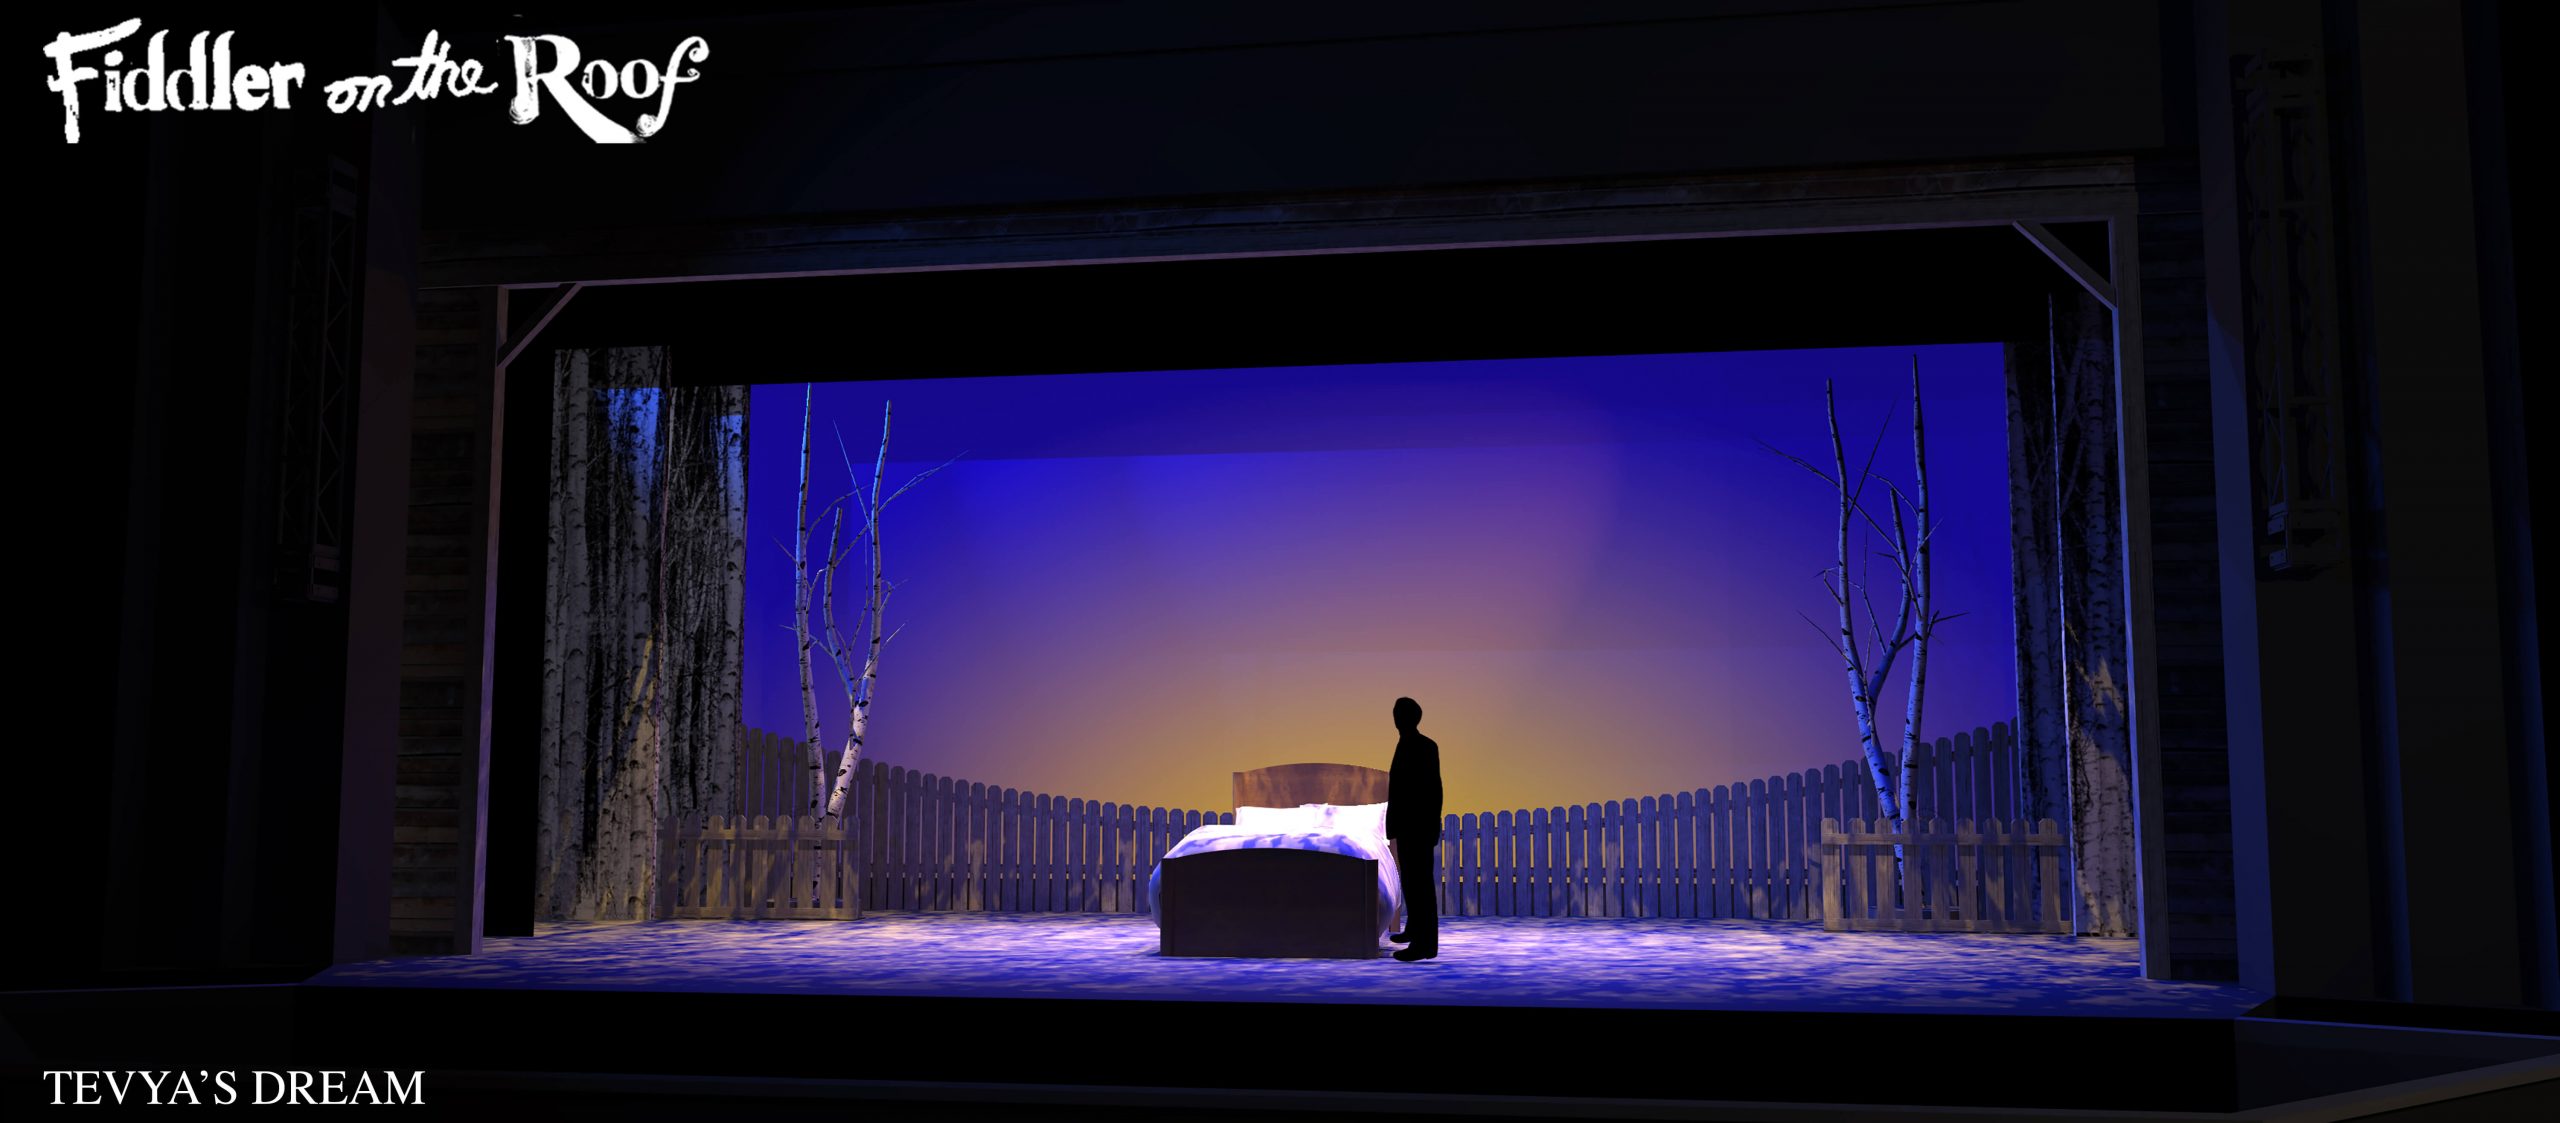 Fiddler on the Roof Musical - Tevyas dream - scenery rental - Front Row Theatrical